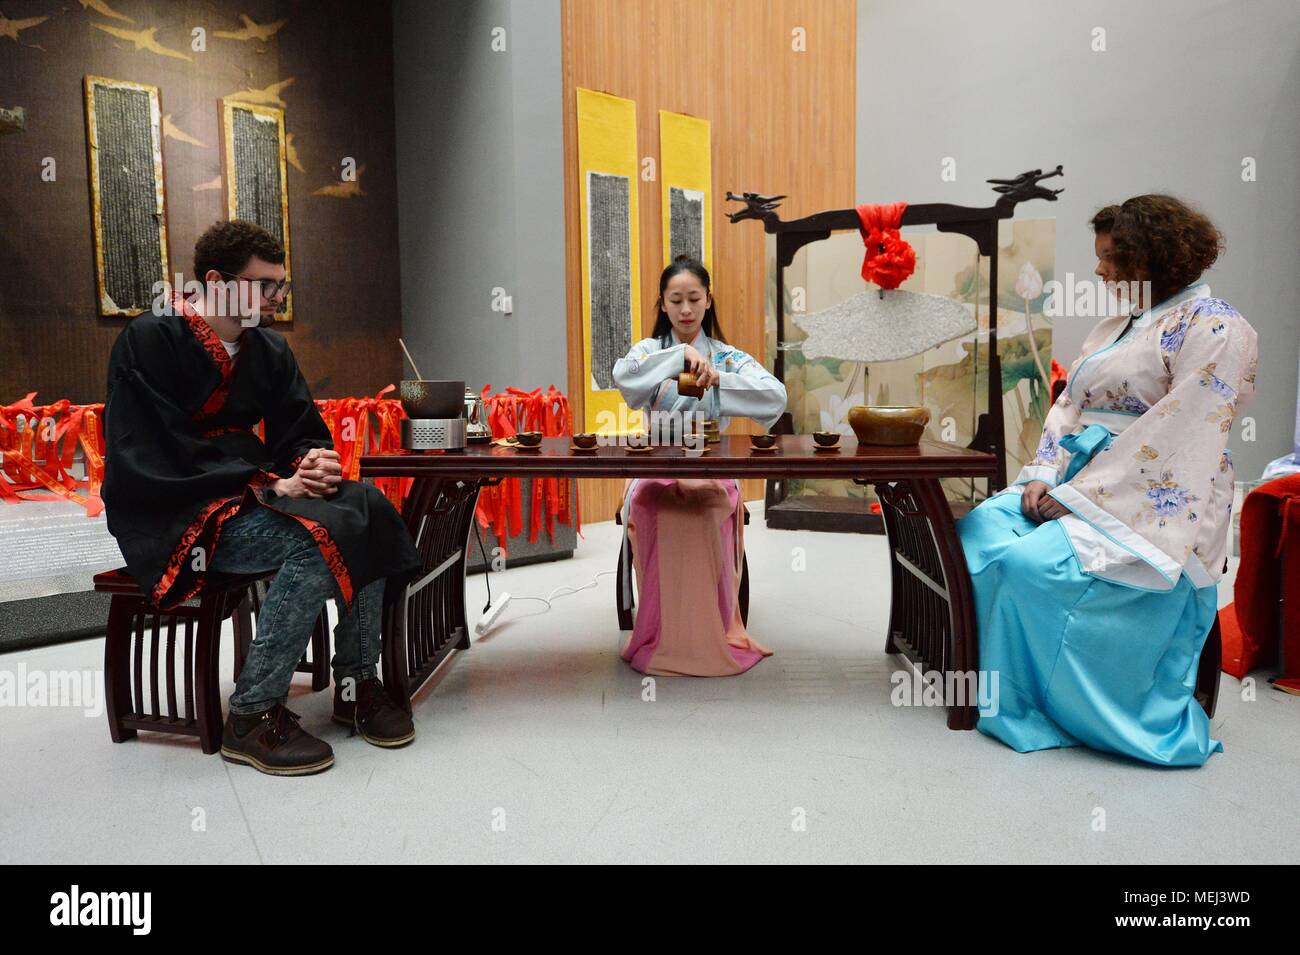 Qingdao, Qingdao, China. 22nd Apr, 2018. Qingdao, CHINA-22nd April 2018: International students experience Chinese traditional culture at Han Portrait Brick Museum in Qingdao, east China's Shandong Province, April 22nd, 2018. Credit: SIPA Asia/ZUMA Wire/Alamy Live News Stock Photo